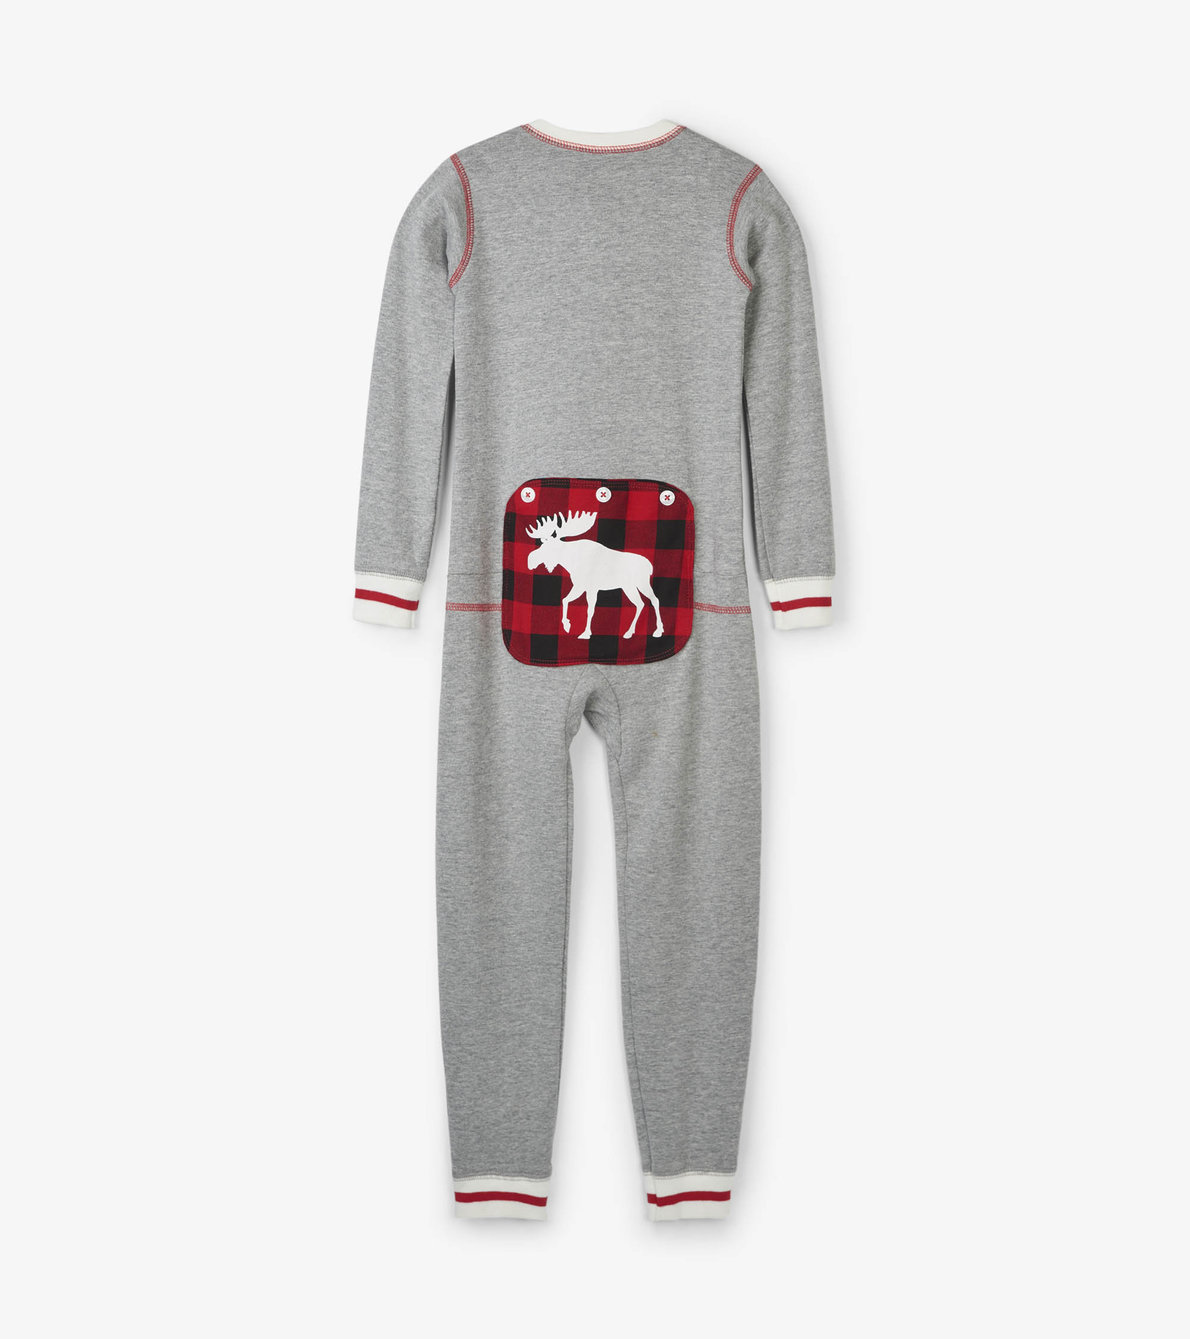 View larger image of Canadiana Moose Kids Union Suit